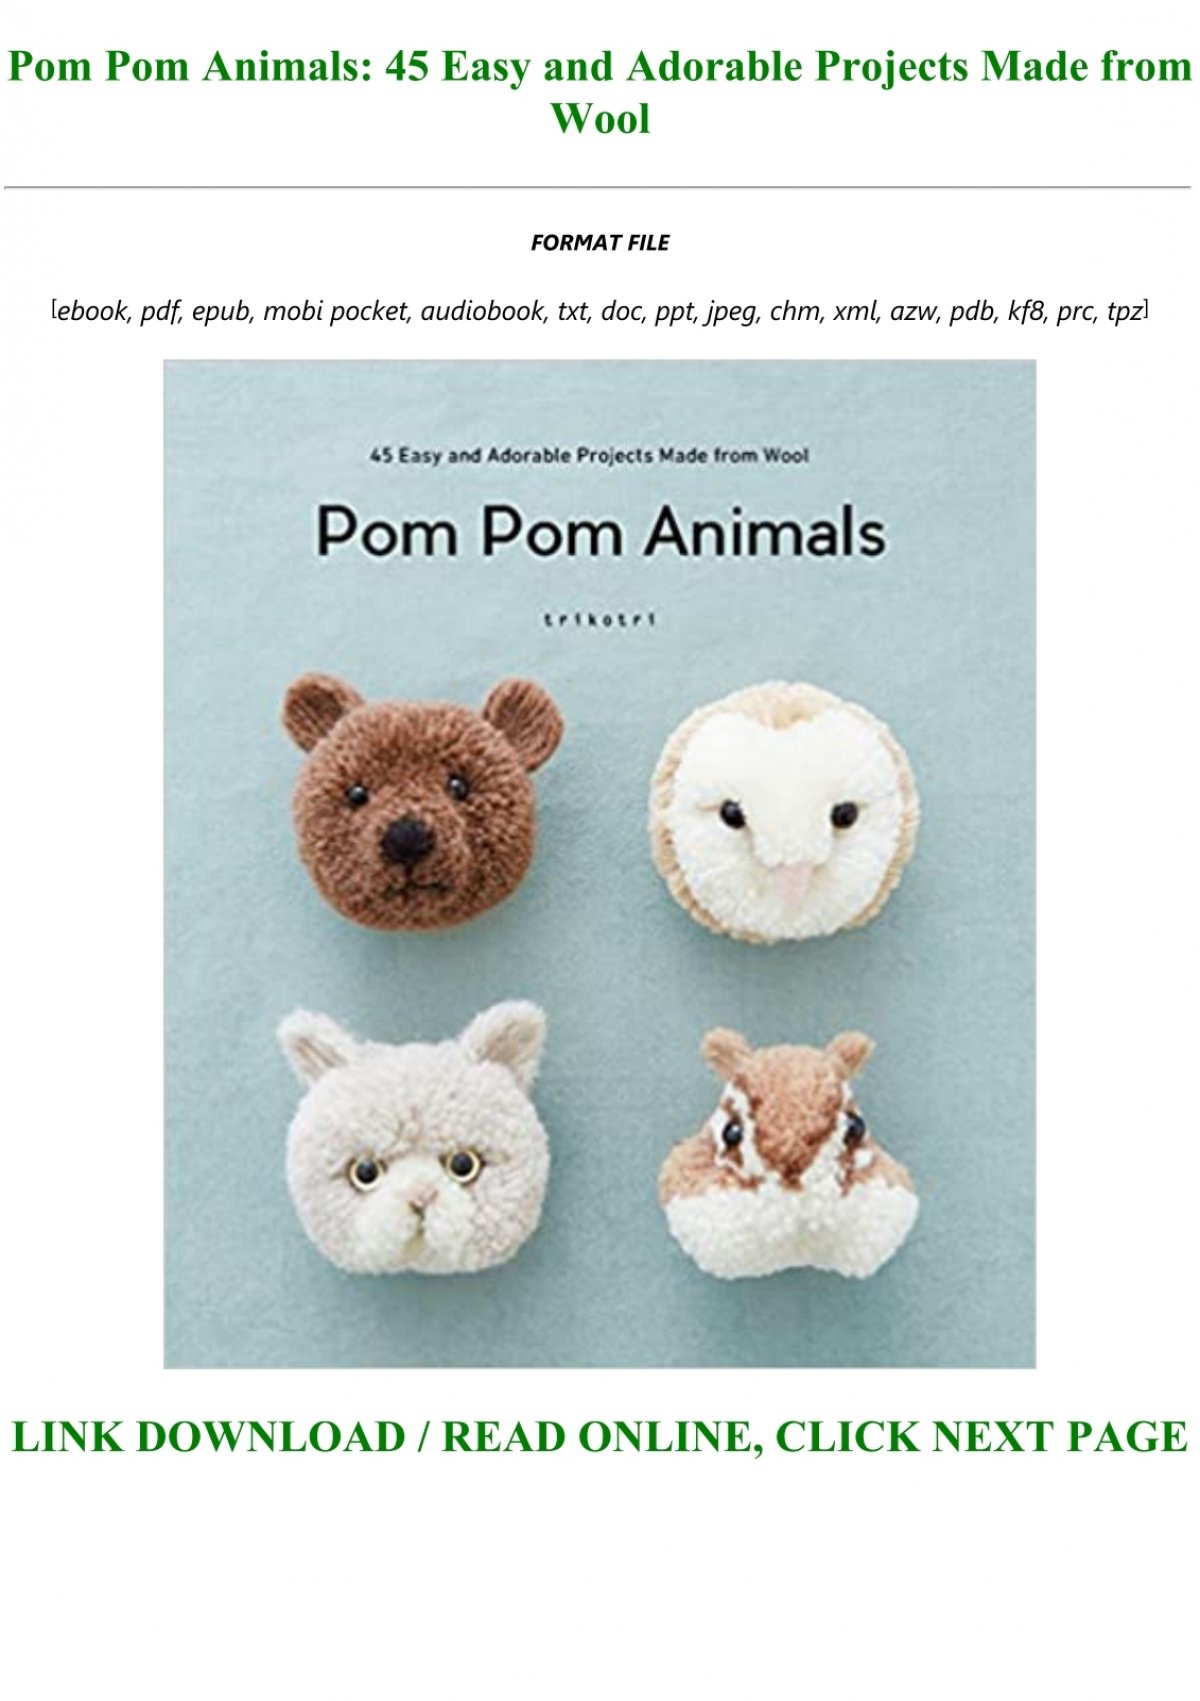 E Book Download Pom Pom Animals 45 Easy And Adorable Projects Made From Wool Full Books